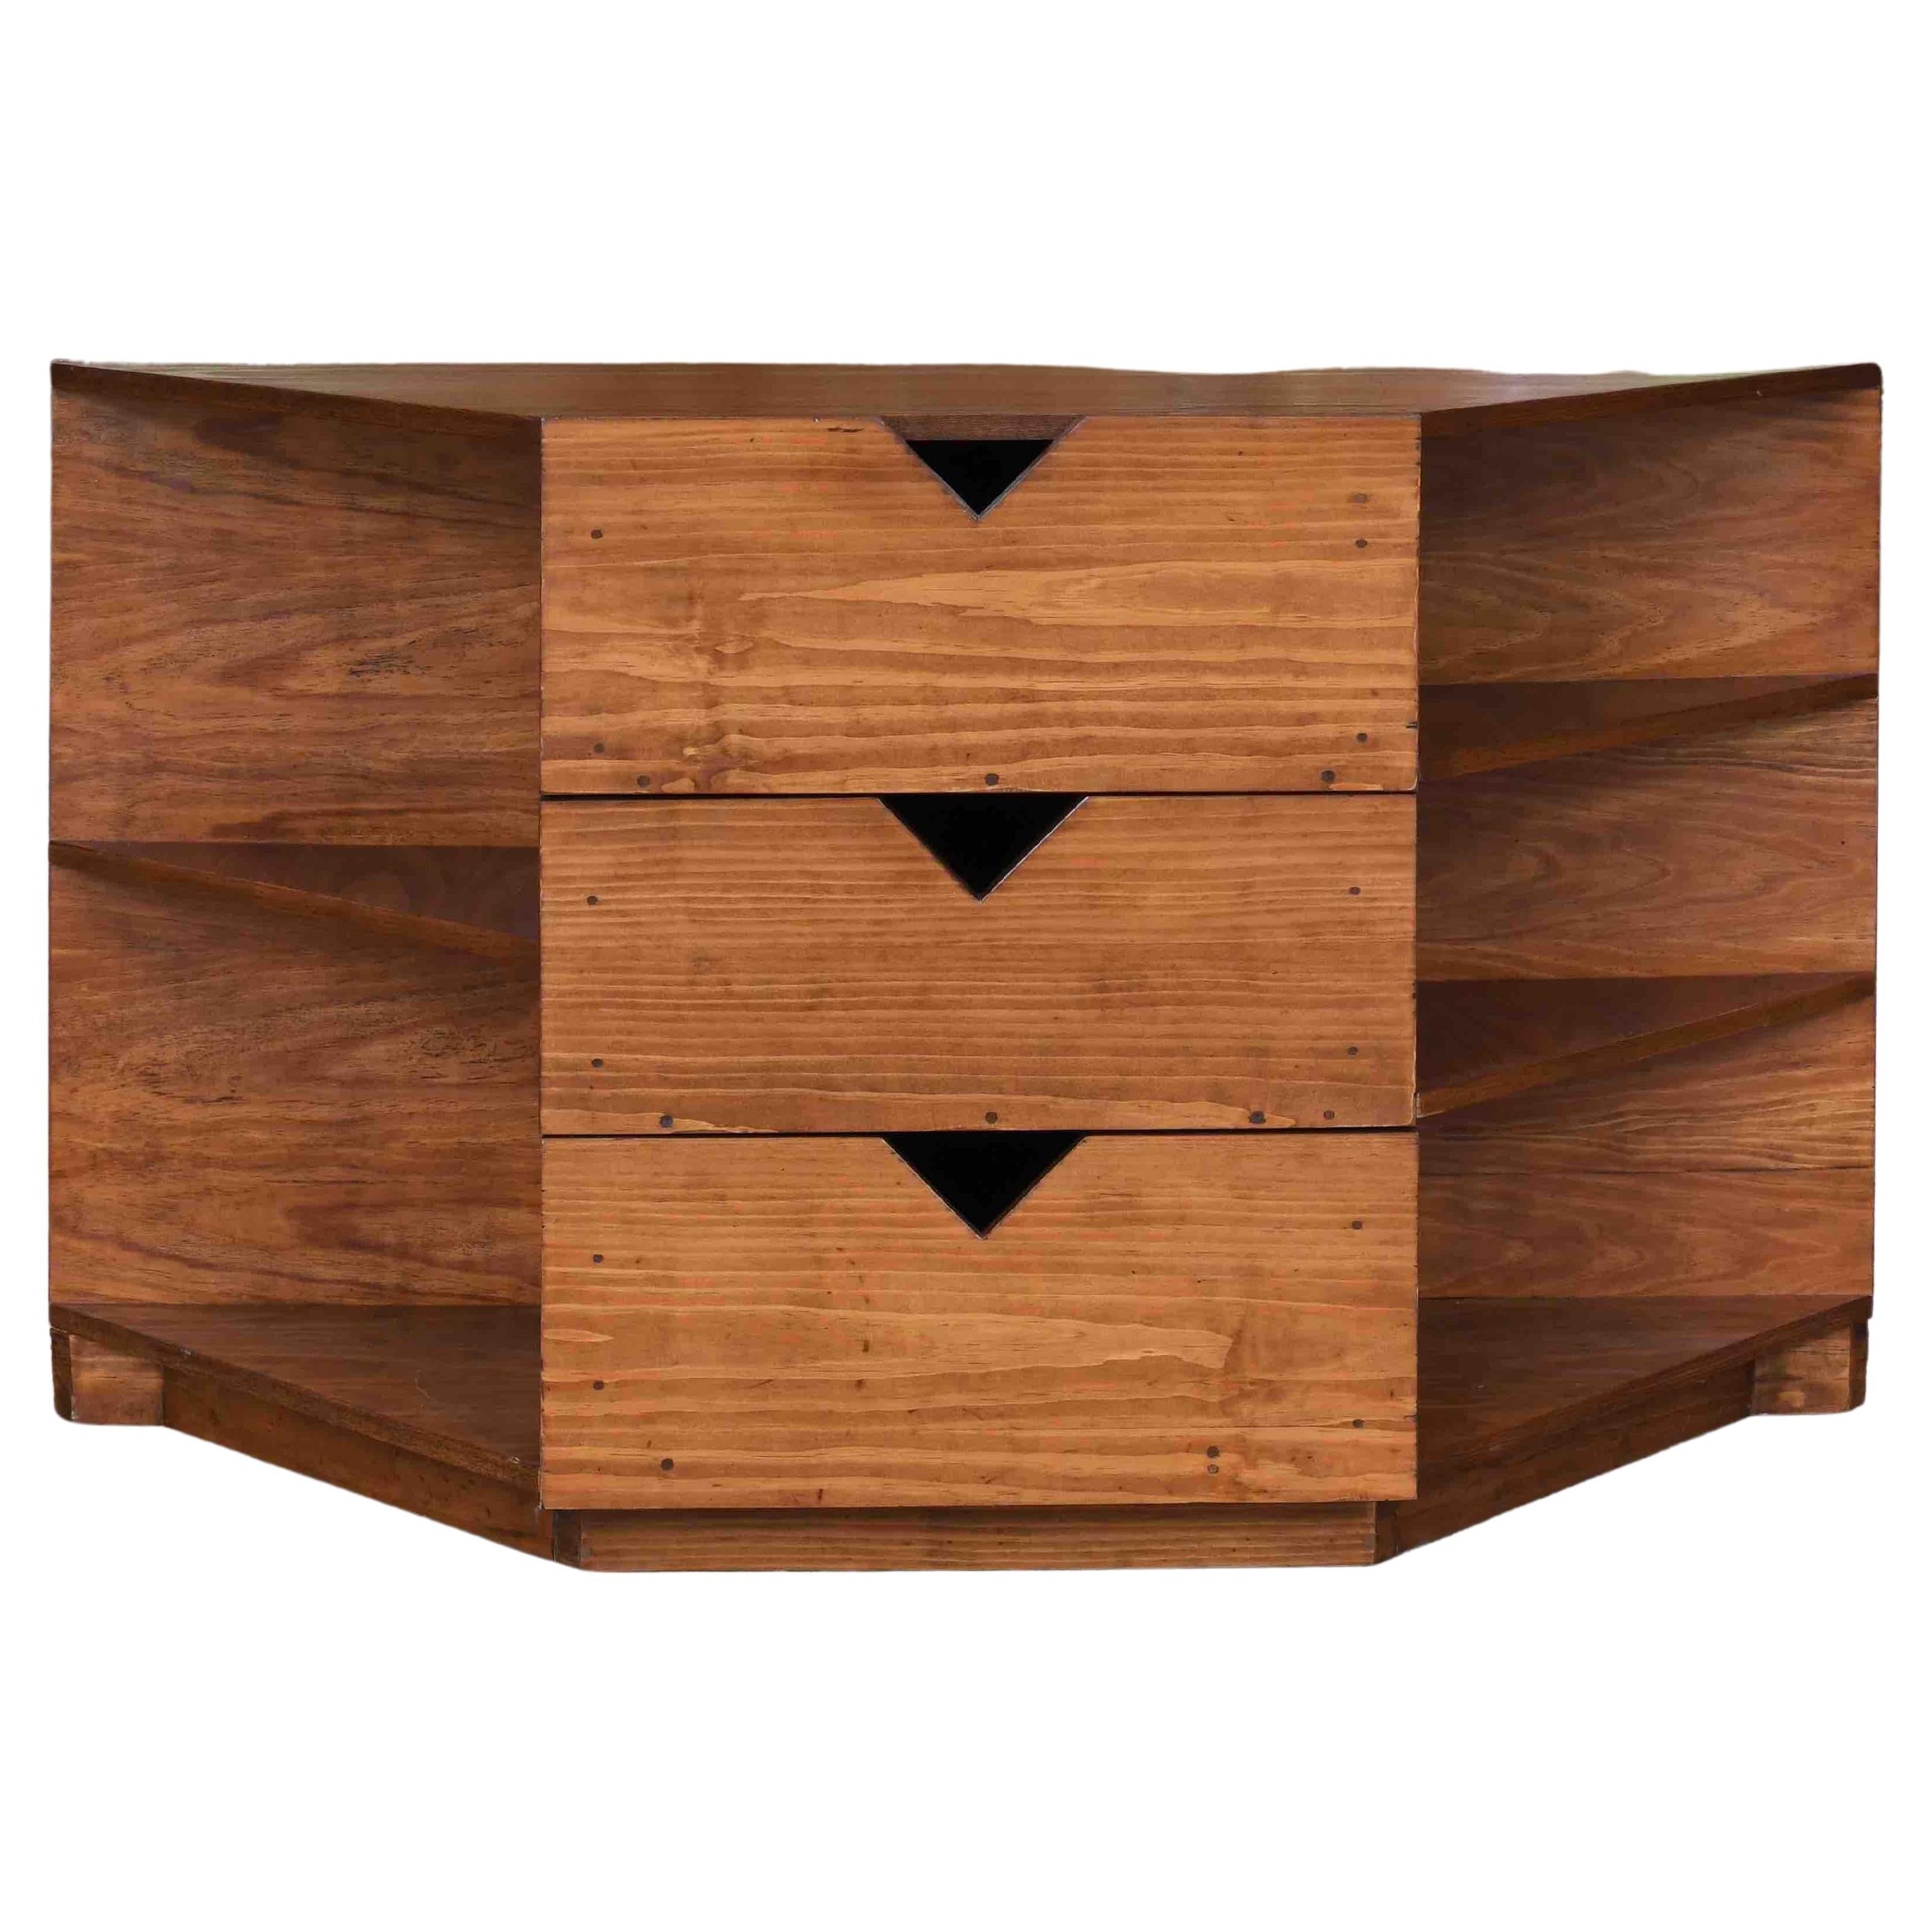 Hervé Baley, Wooden Chest of Drawers, C. 1991-1996